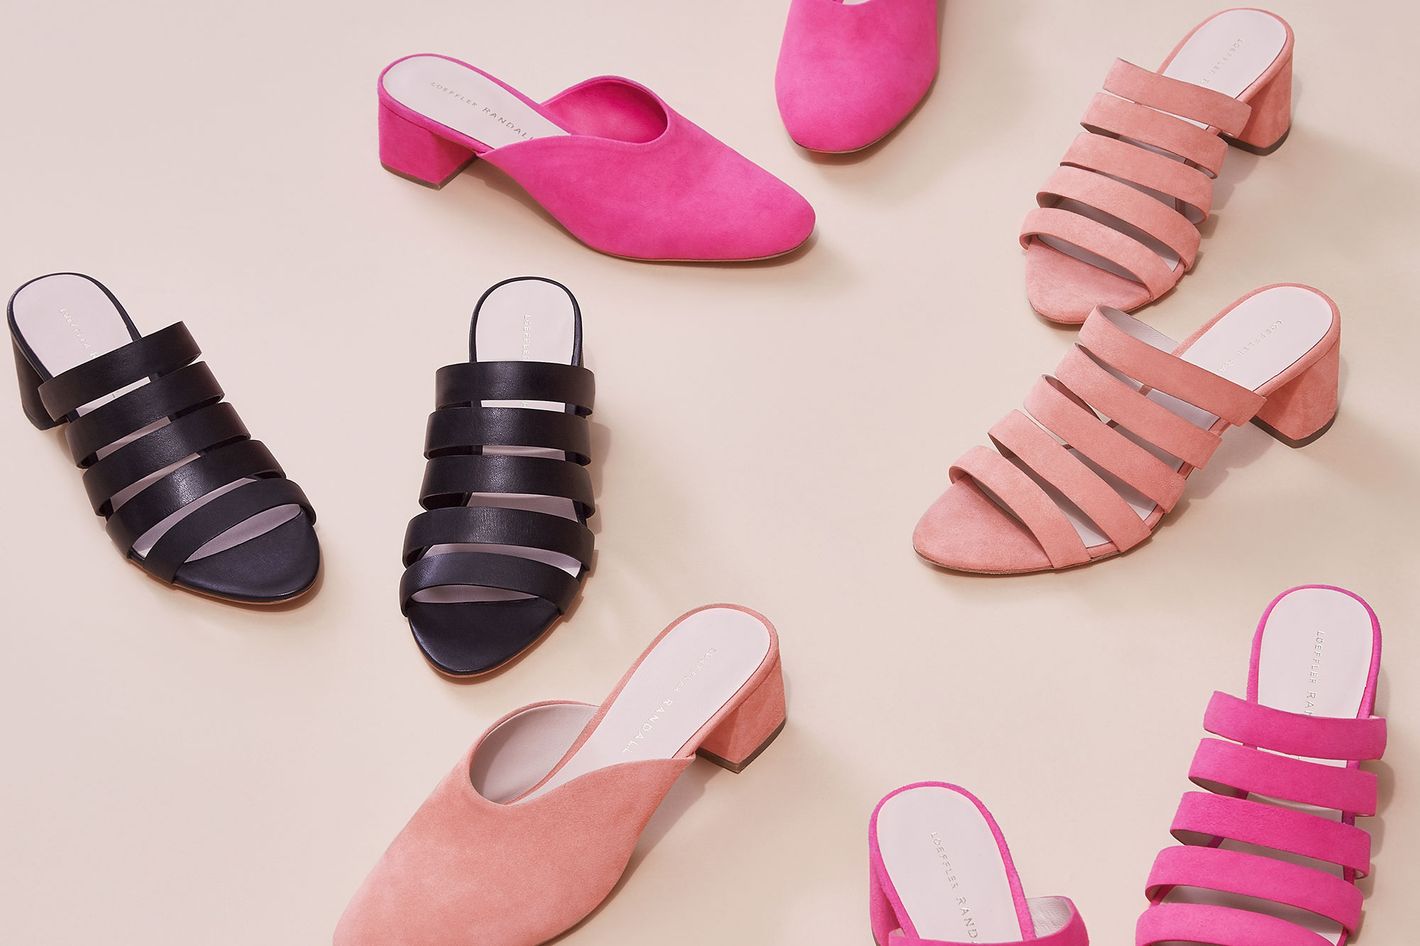 The Loeffler Randall Sale Has the Best Spring Shoes and Bags